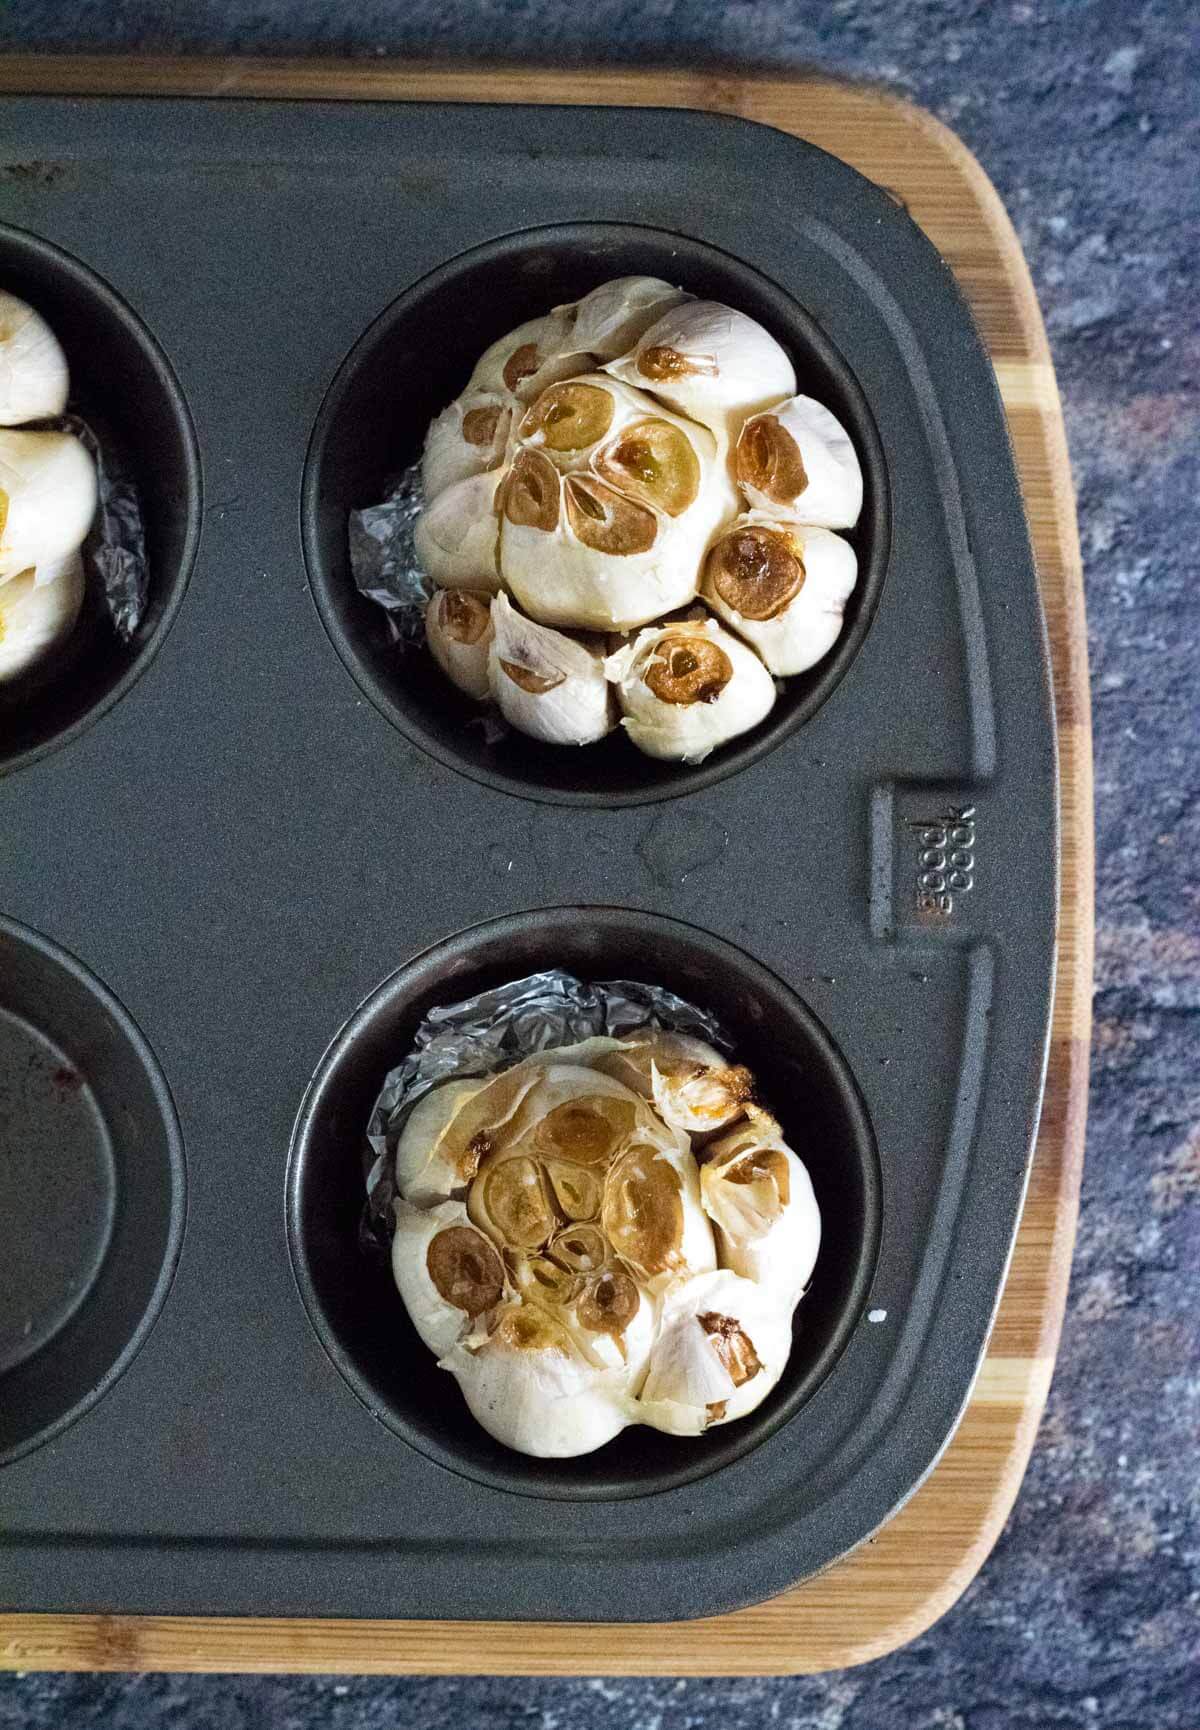 Roasted heads of garlic in a muffin tin.